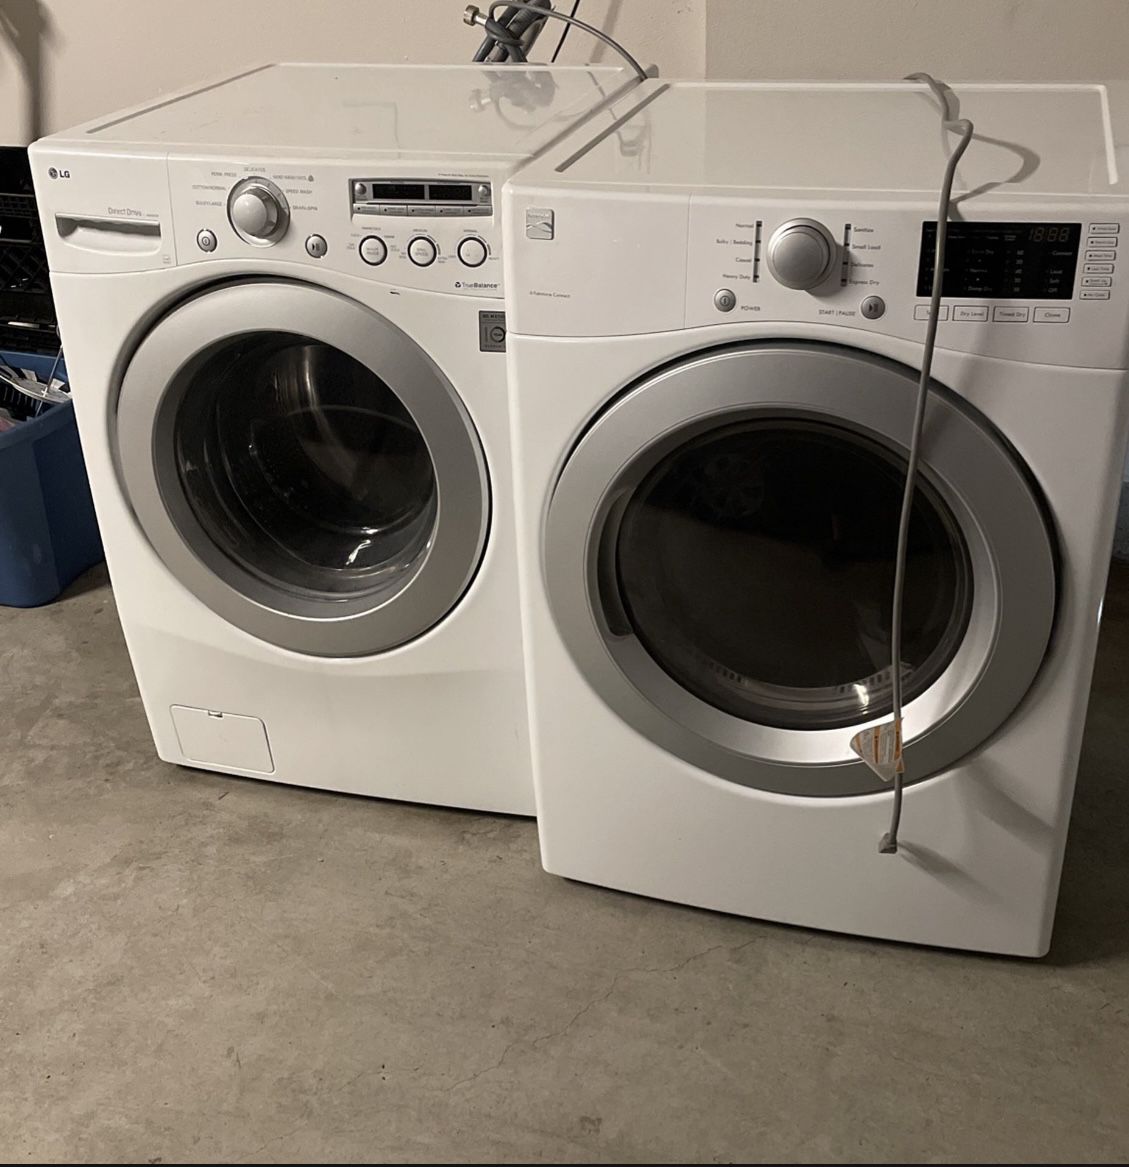 LG Washer - Kenmore Dryer